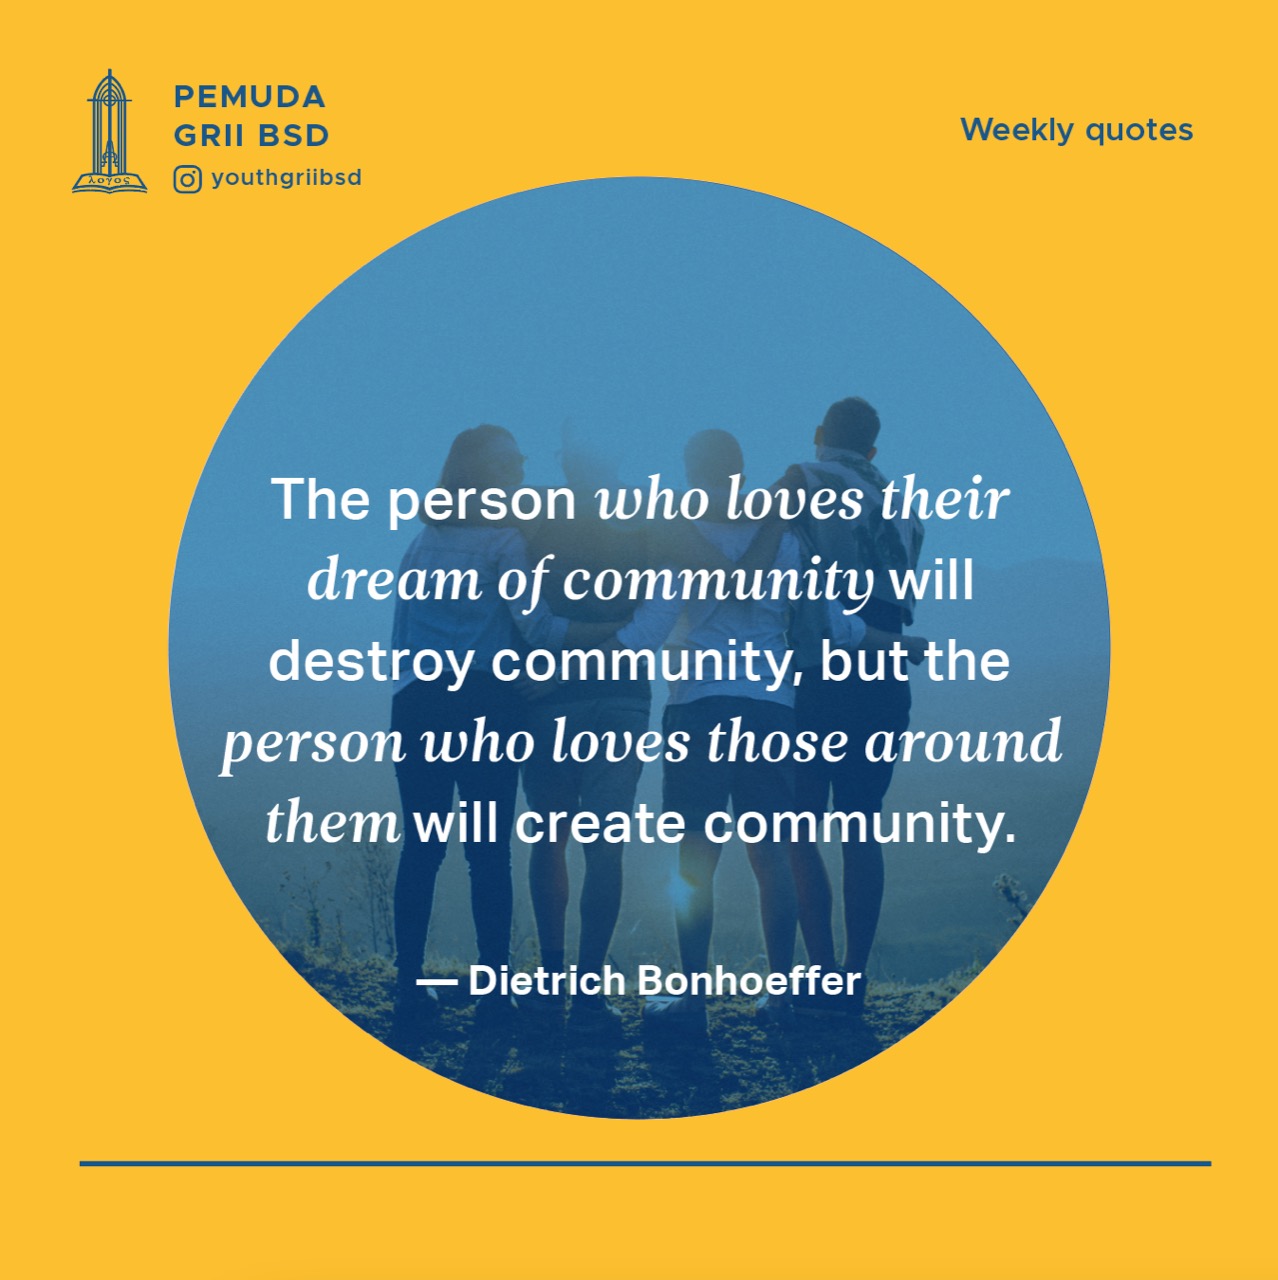 The person who loves their dream of community will destroy community, but the person who loves those around them will create community.